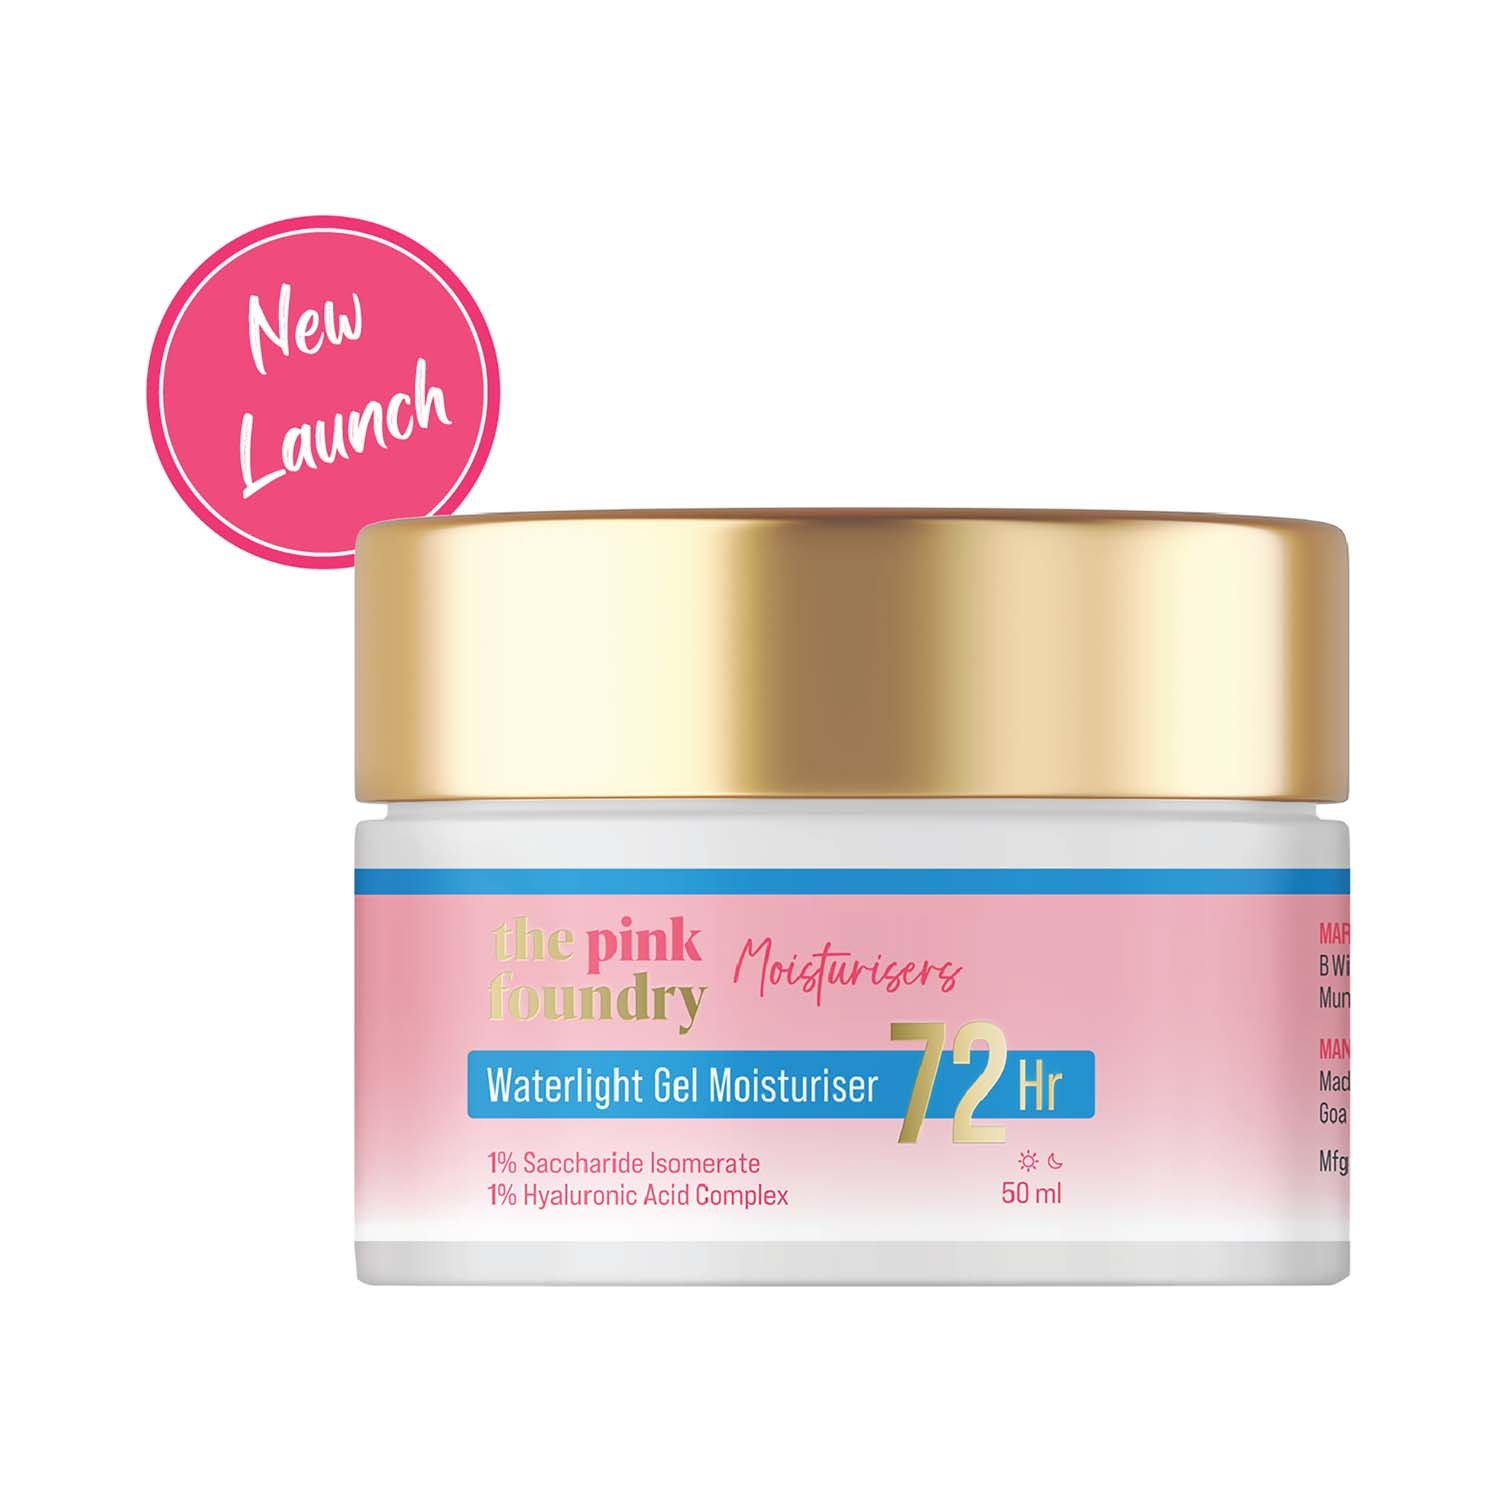 The Pink Foundry | The Pink Foundry Waterlight Gel Moisturiser (50ml)